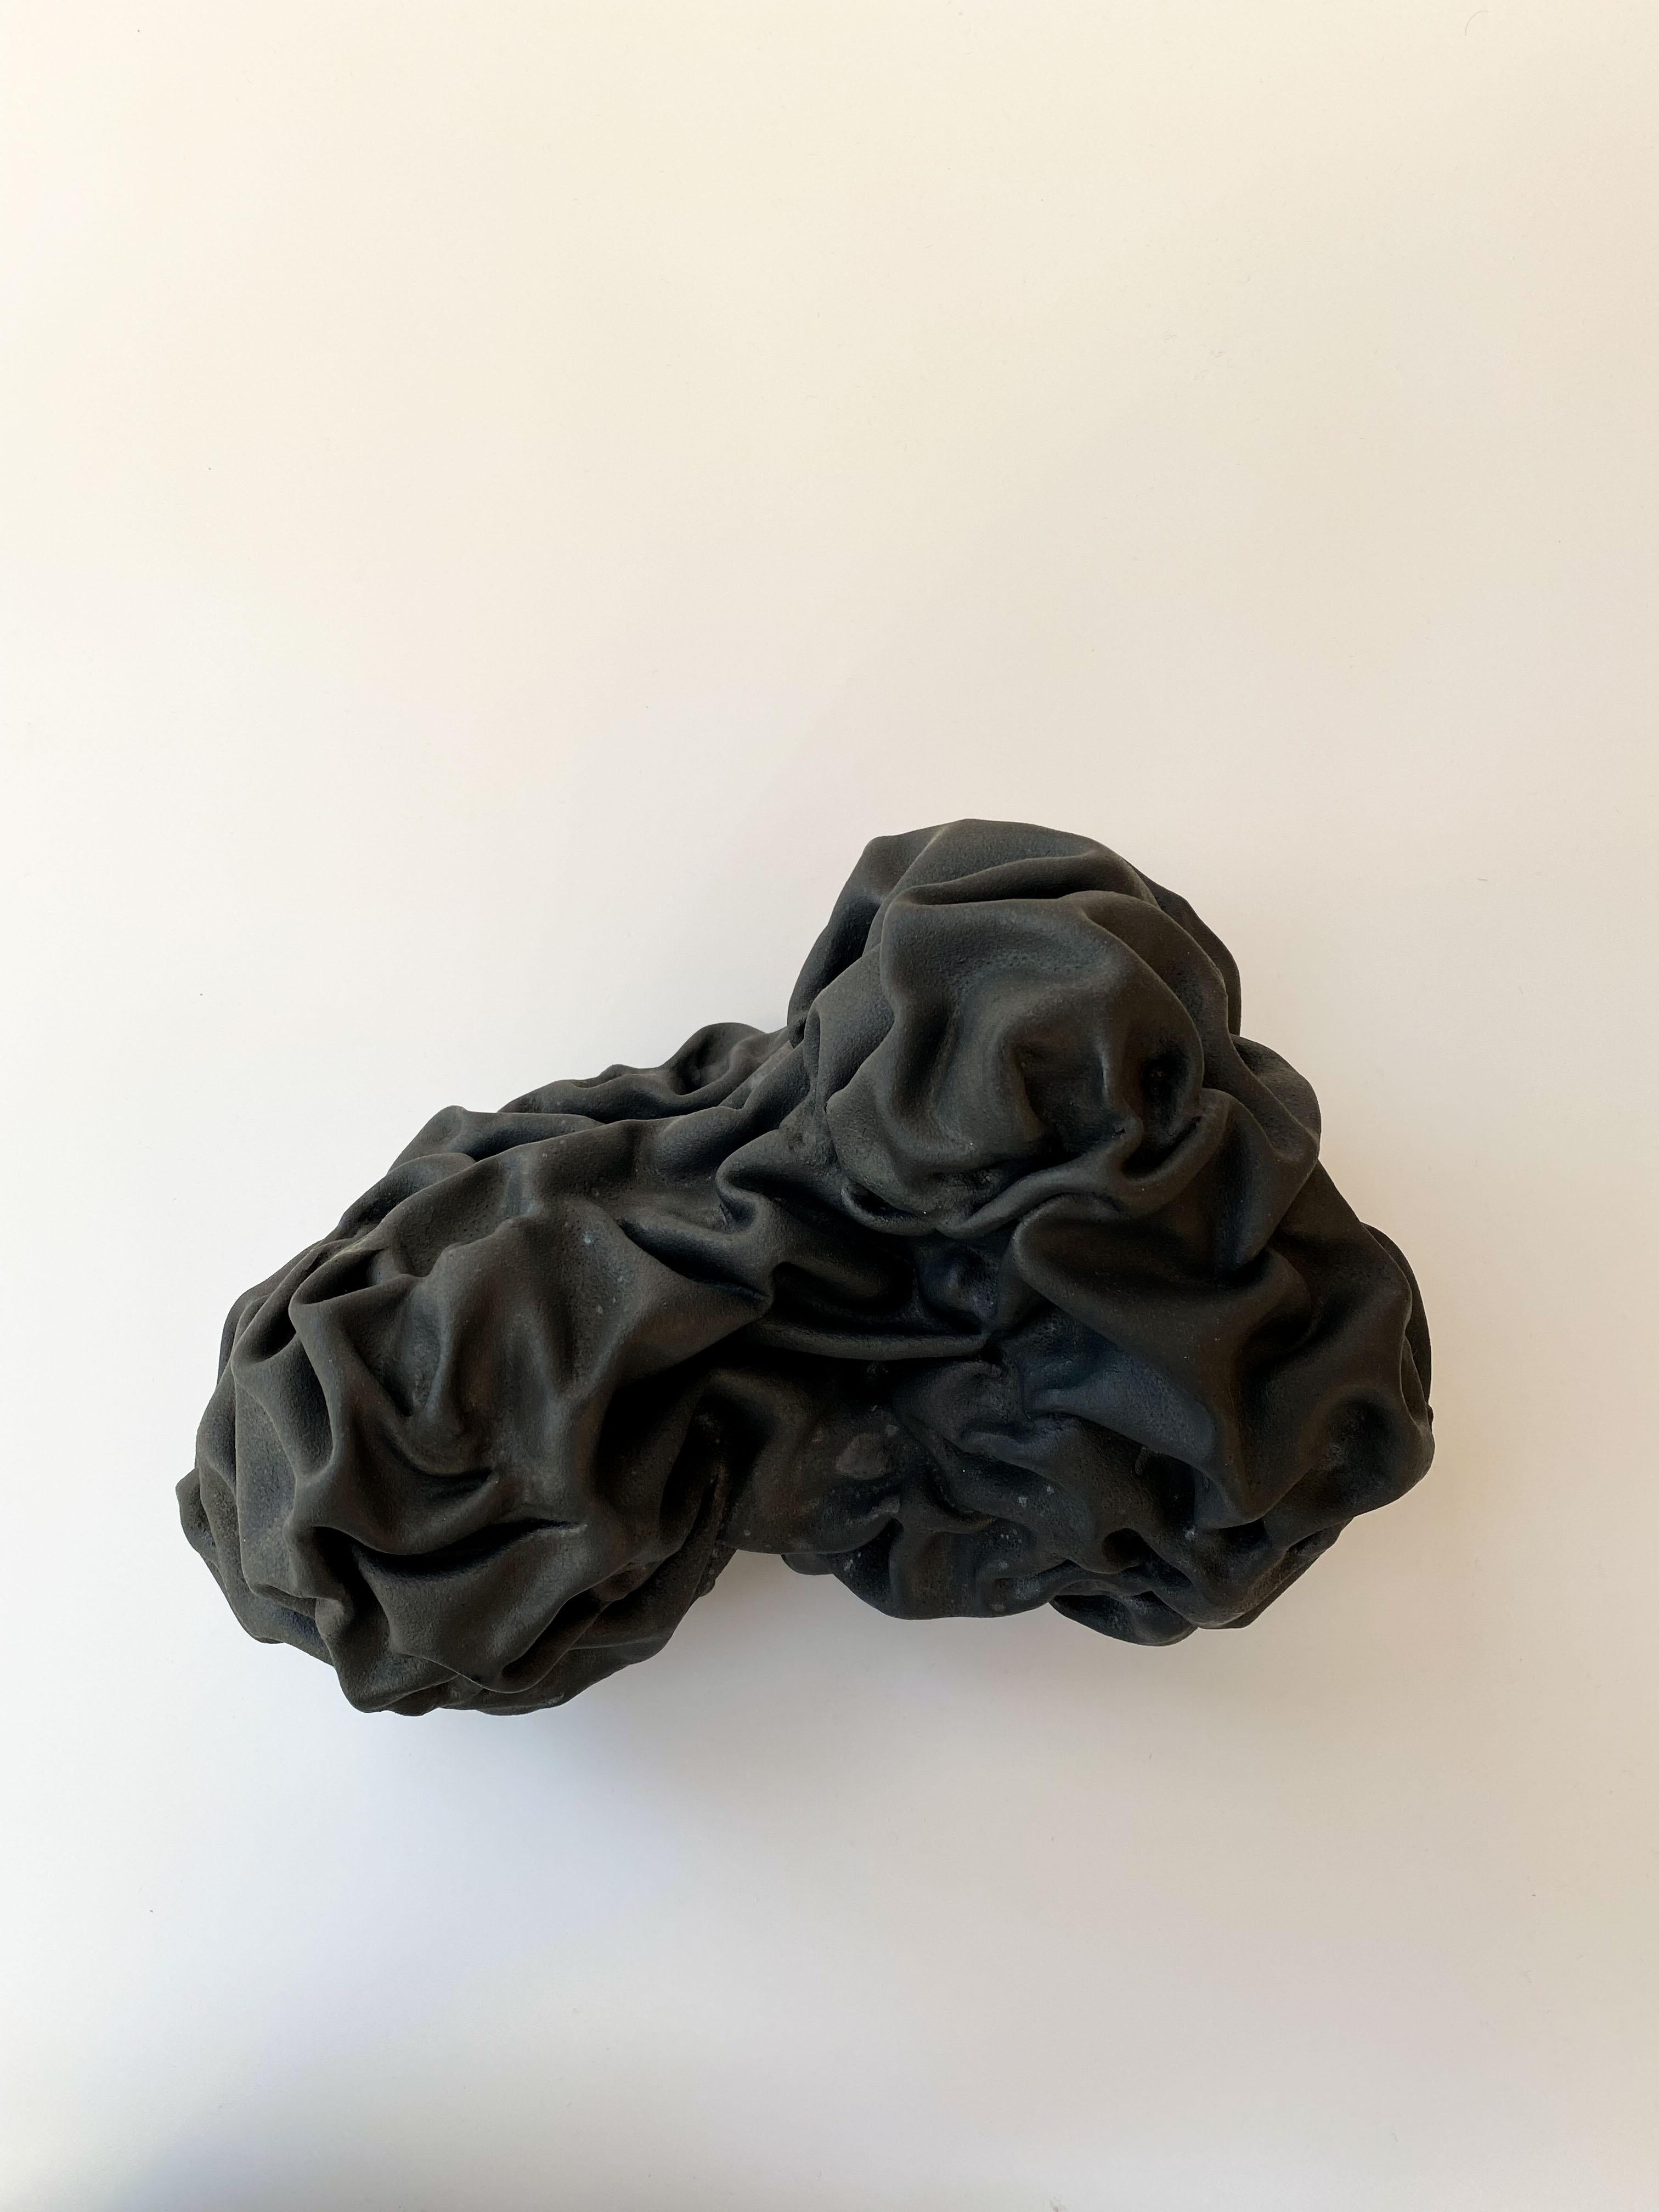 Motion sculpture IV by Sophie Rogers
Dimensions: D 17 x W 32 x H 25 cm
Materials: Ceramic, glaze
Other glaze colors available.

A play with the Material Clay’s heard final conclusion, this is a warm and living sculpture that attracts to be